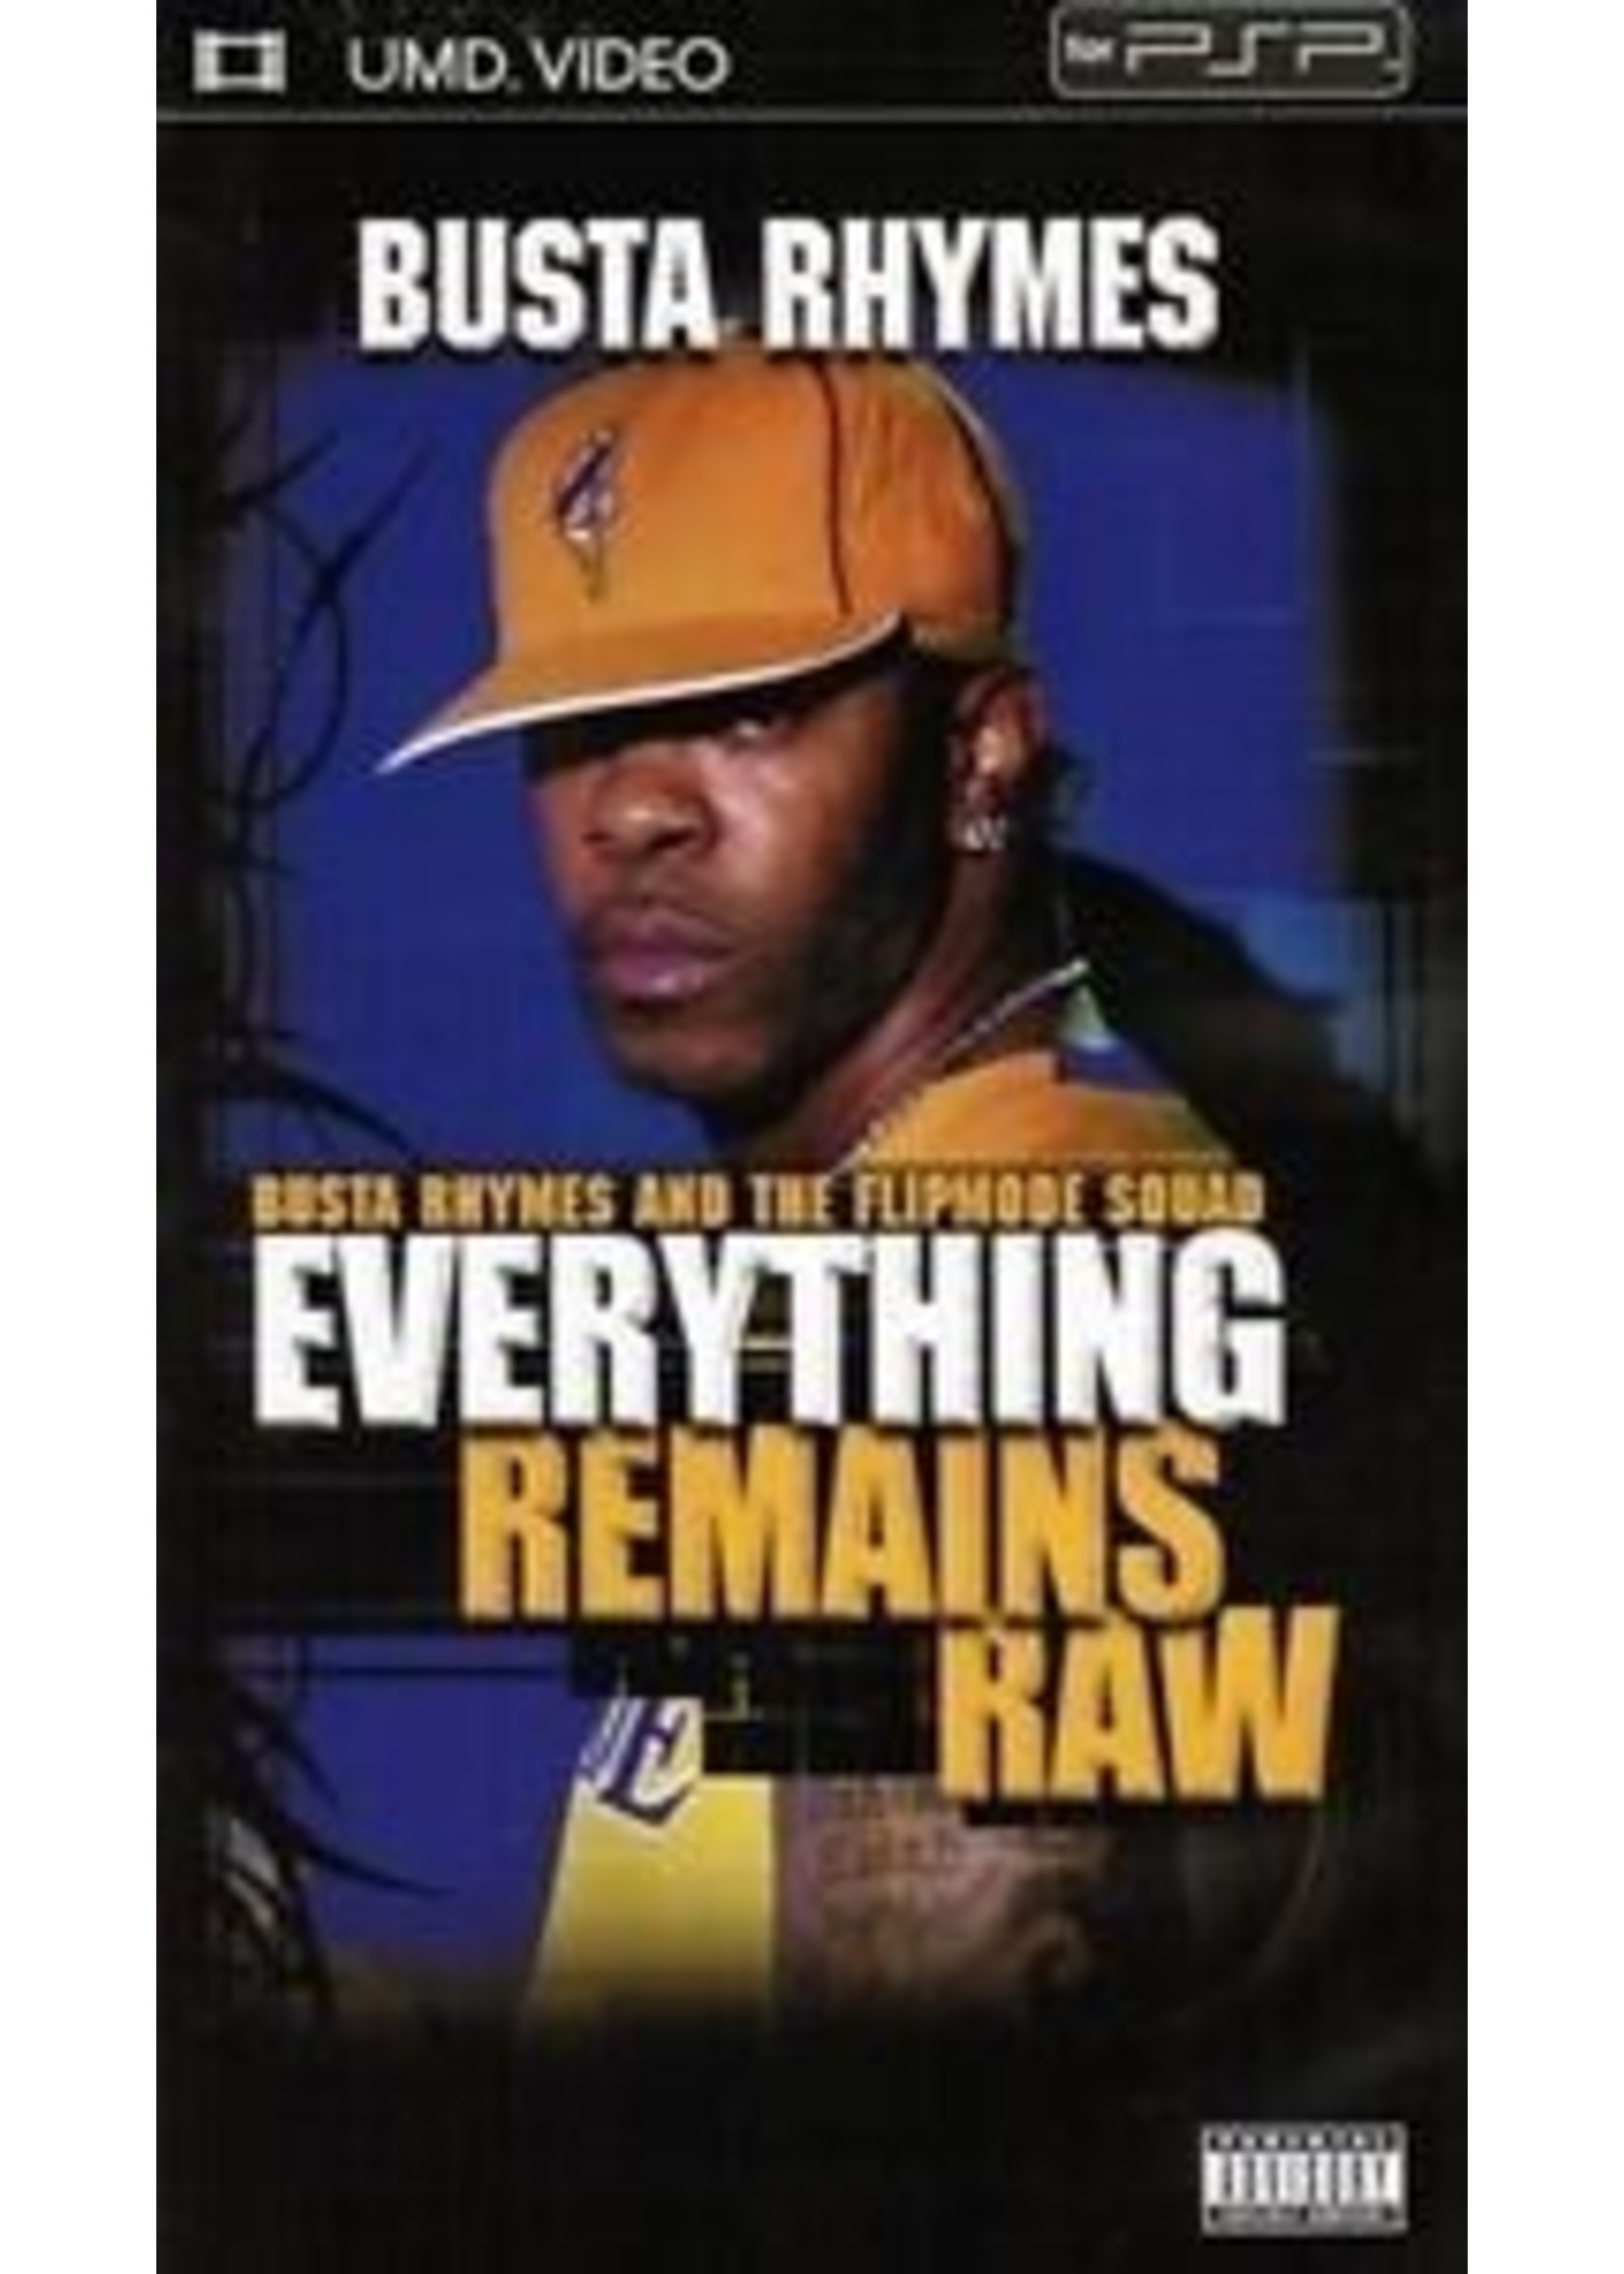 Sony Playstation Portable (PSP) UMD Busta Rhymes - Everything Remains Raw - Game Only